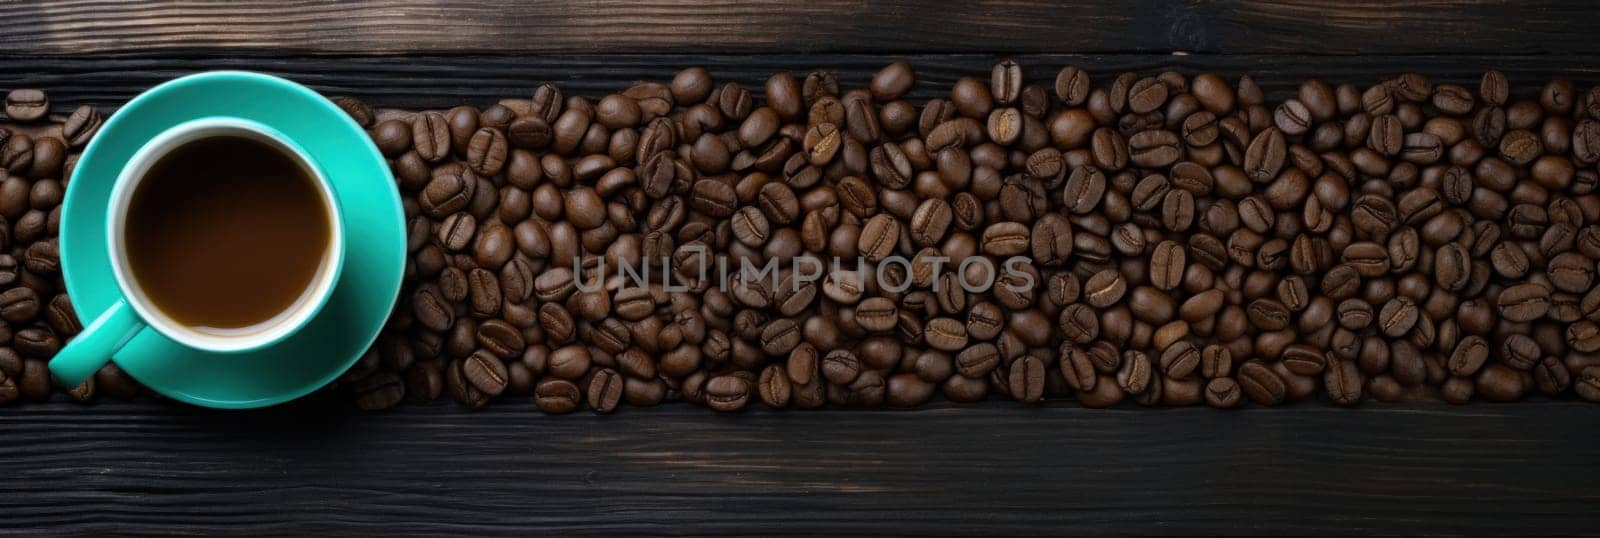 A cup of coffee is sitting on a table next to some beans